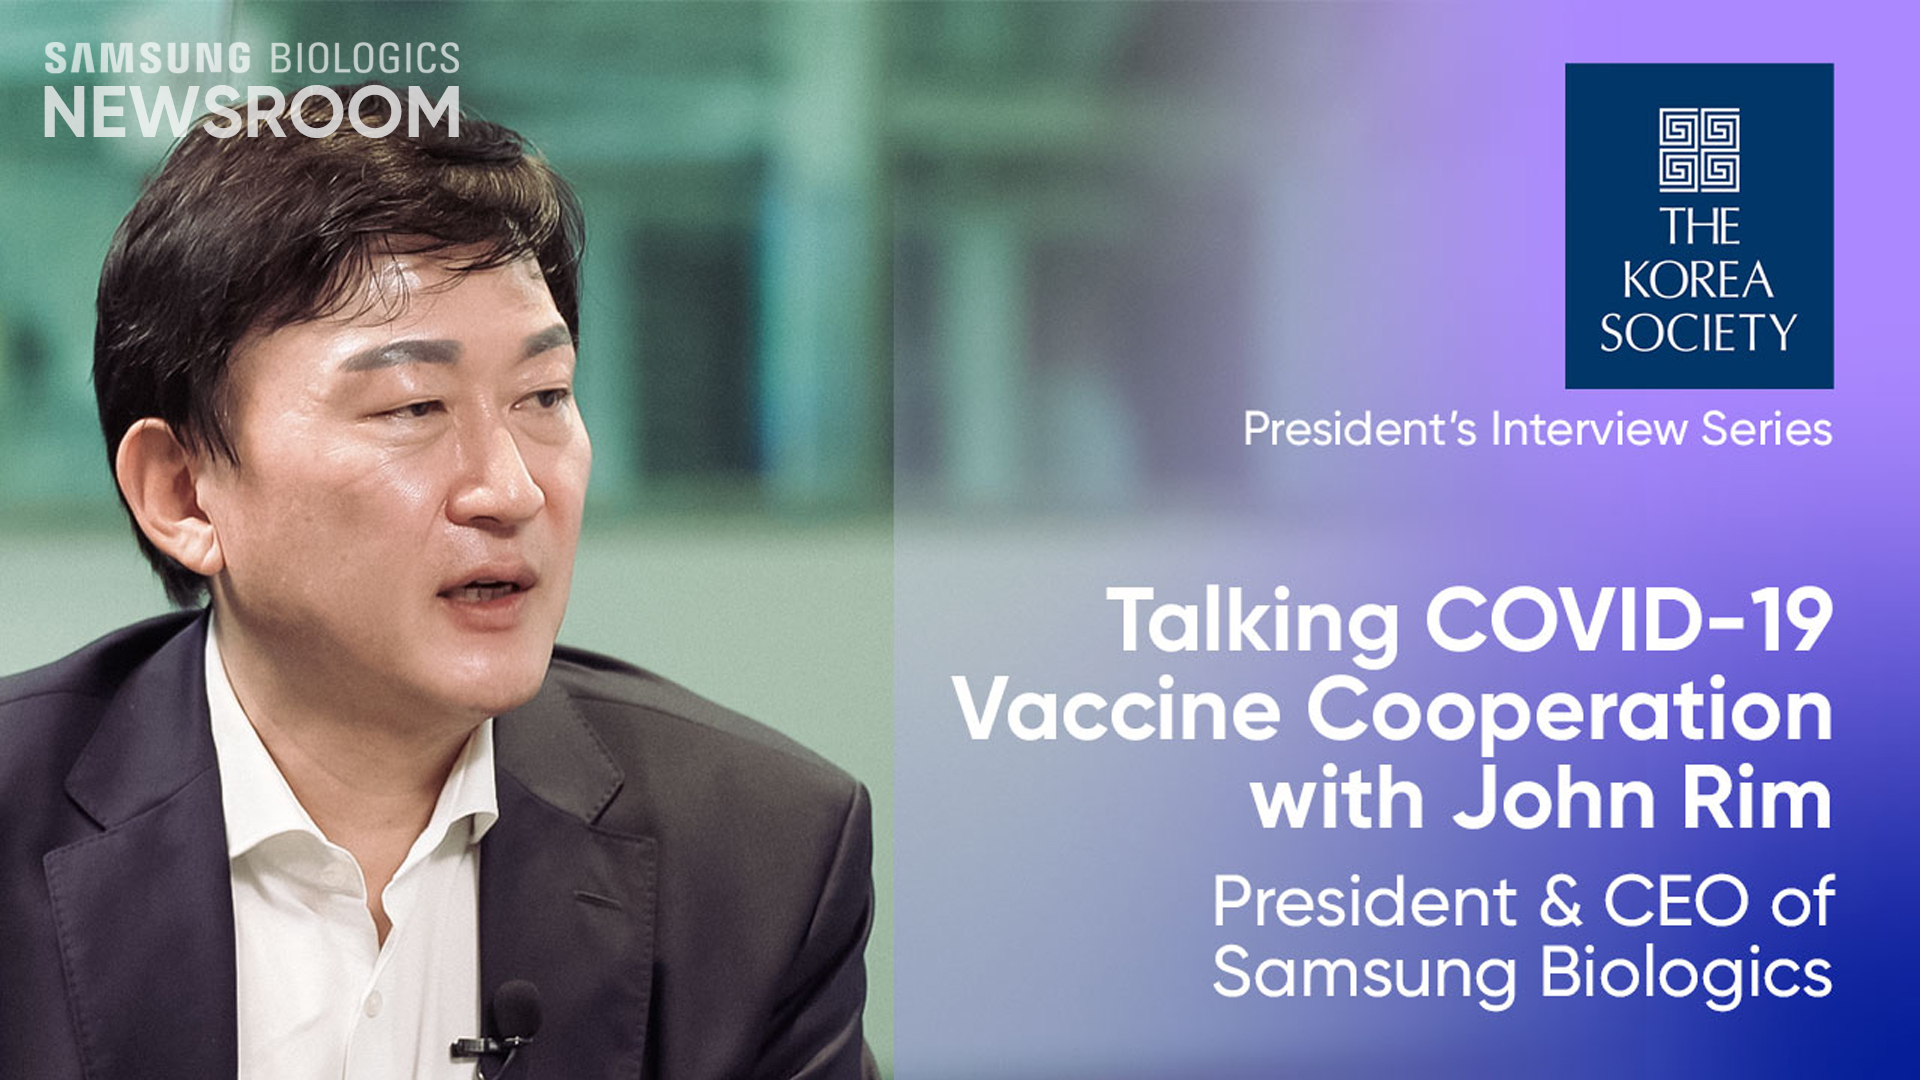 THE KOREA COCIETY President's Interview Series Talking COVID-19 Vaccine Cooperation with John Rim President & CEO of Samsung Biologics